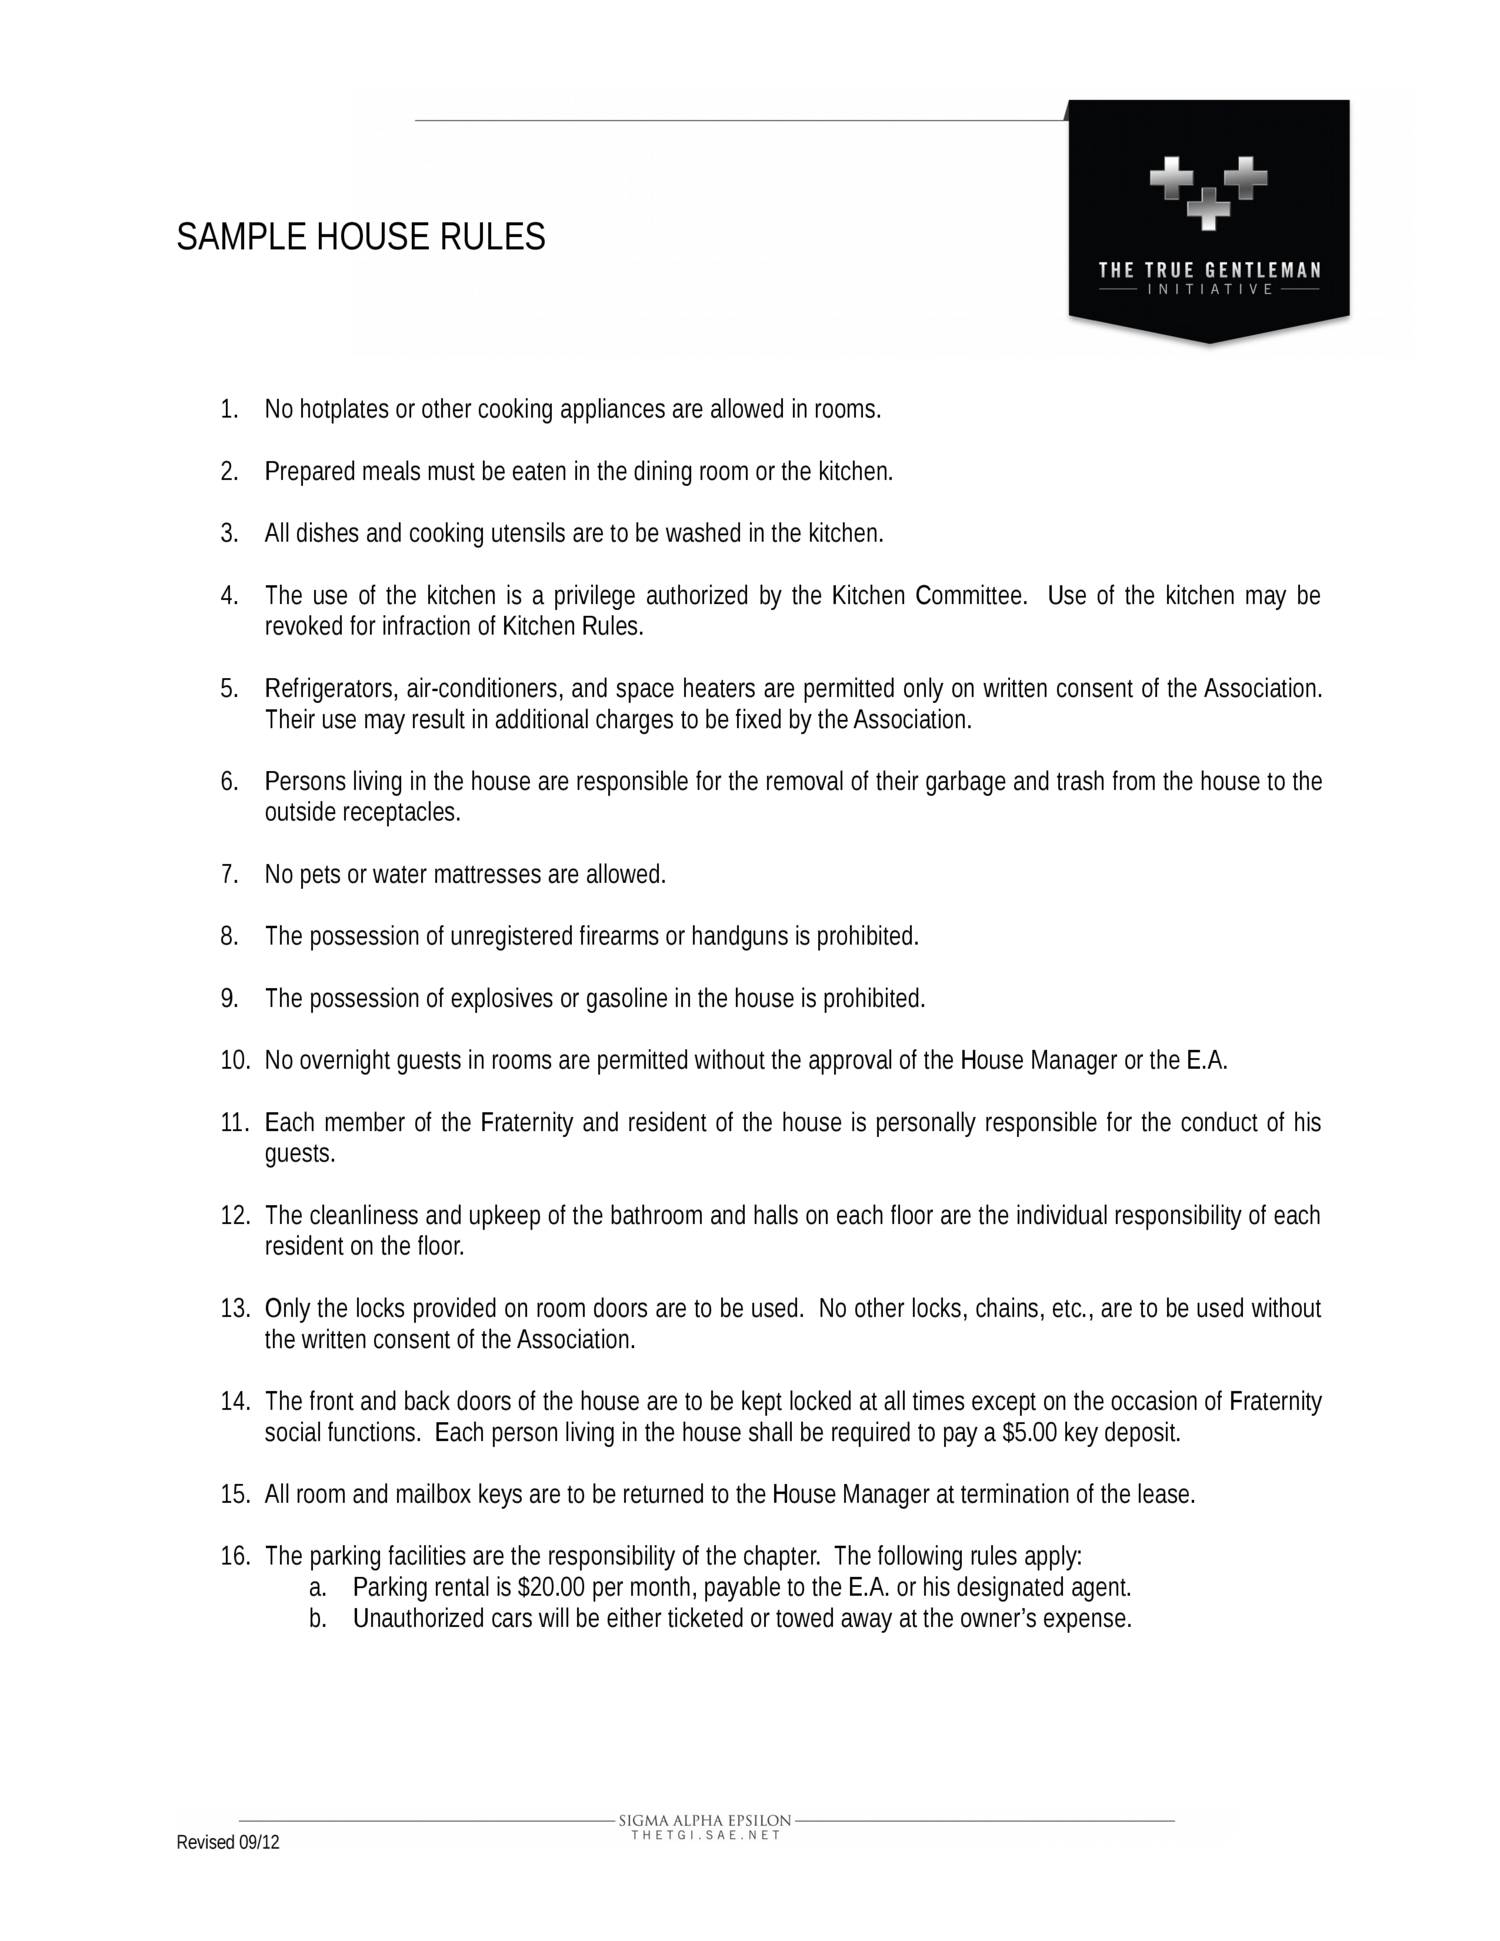 essay about the house rules